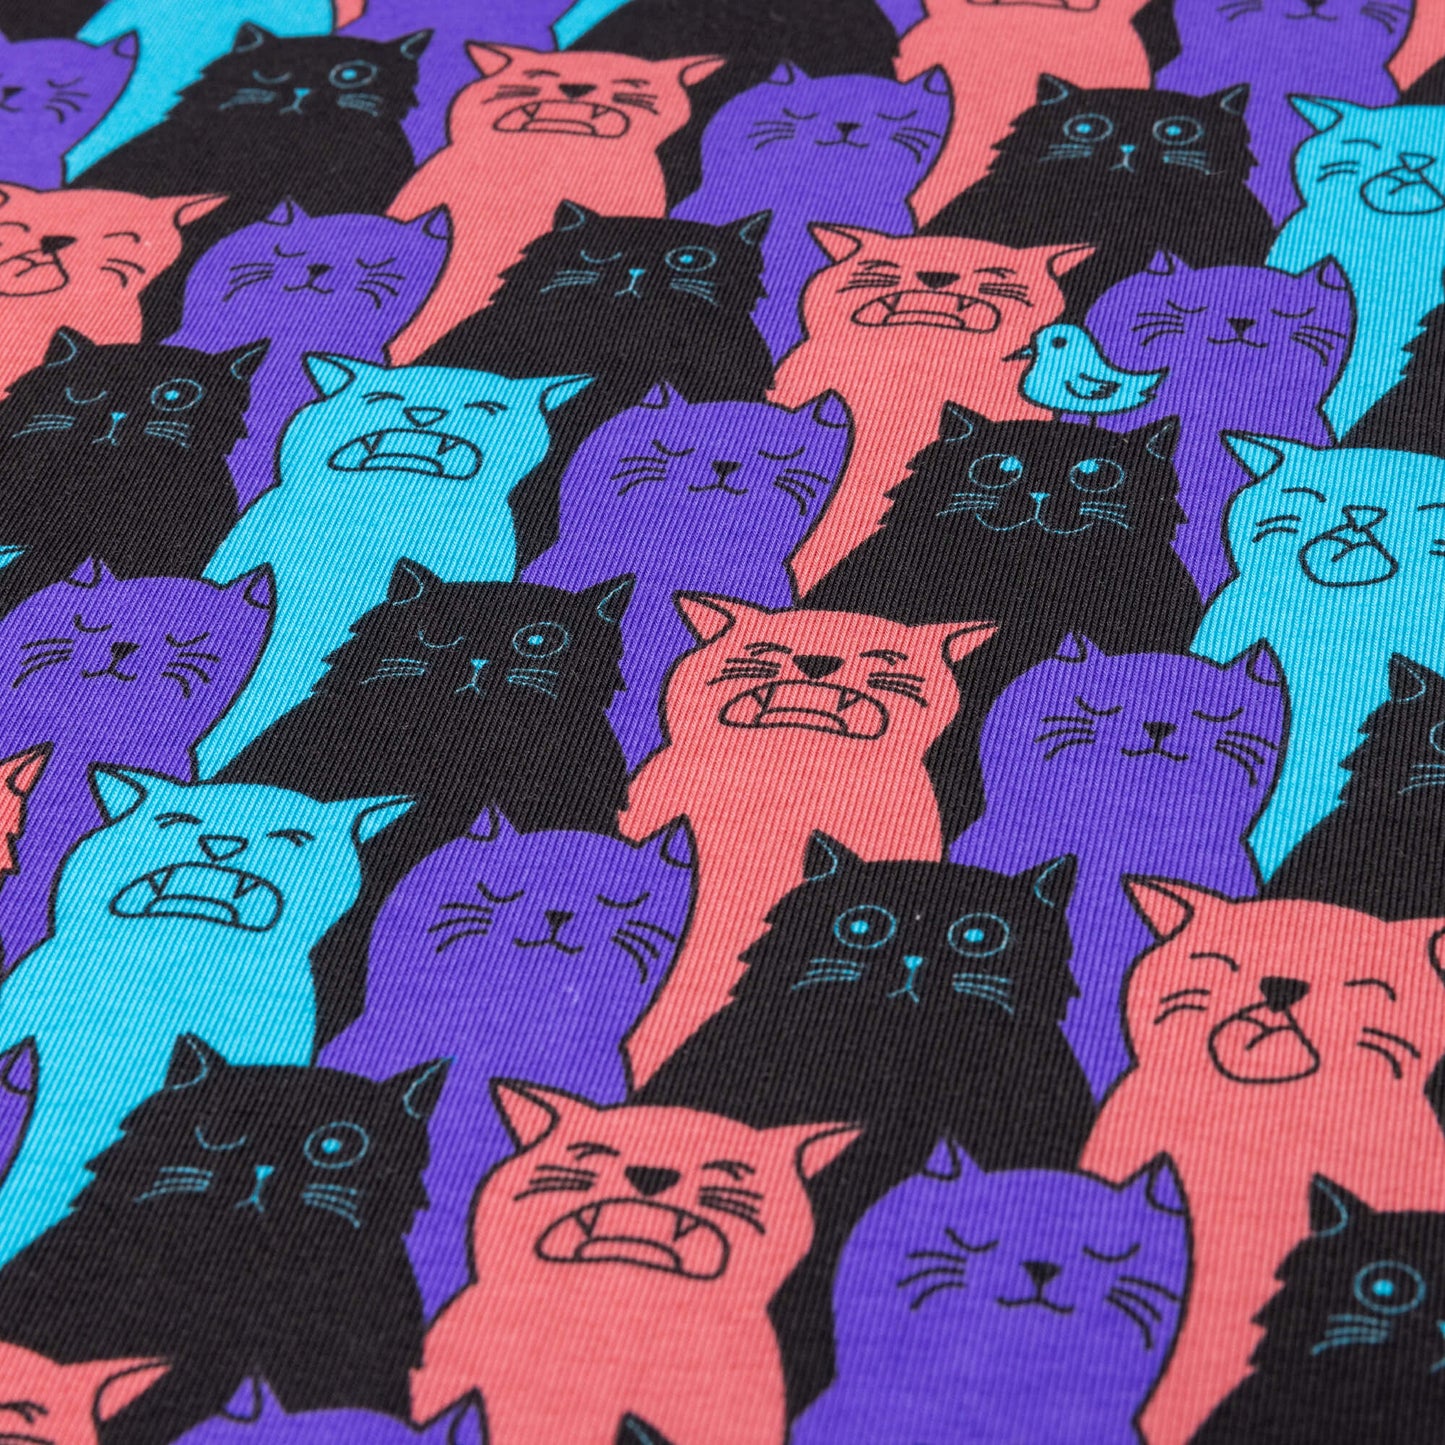 A stretch jersey fabric featuring cats that look like they are winking, singing or have their eyes shut, their is a bird one one of their heads. They are purple, black, pink and bright blue.